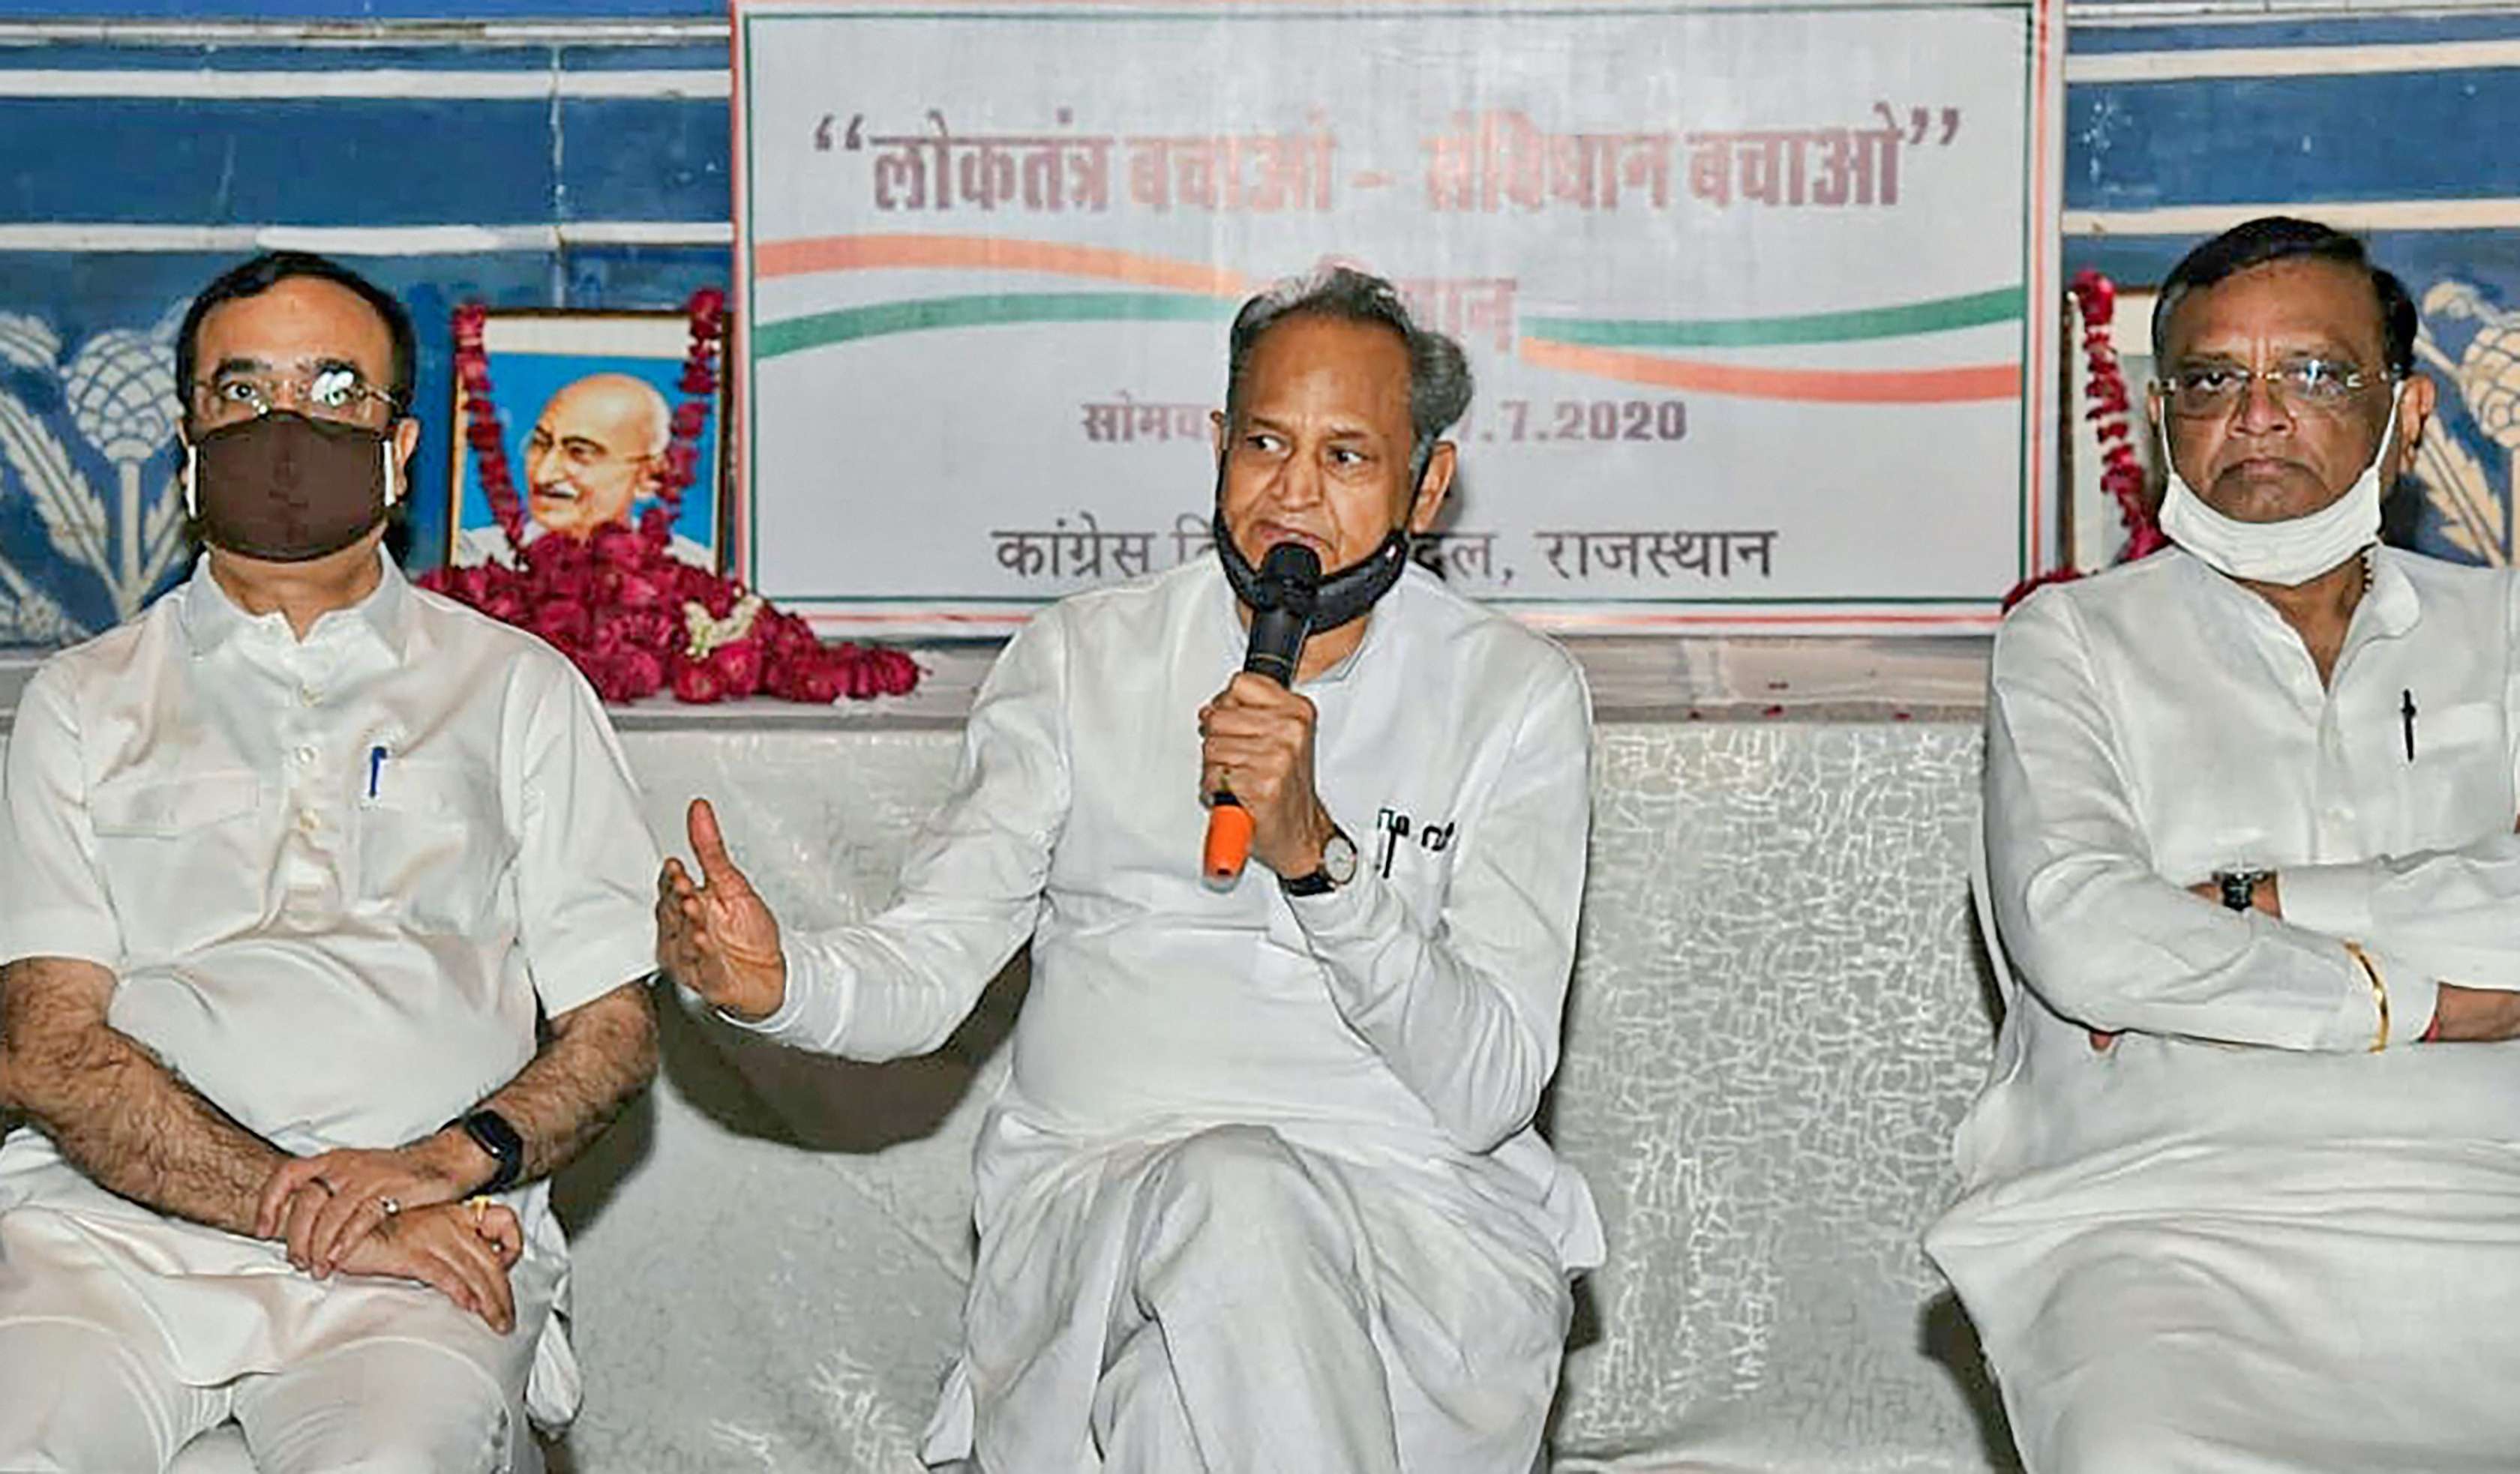 Rajasthan CM Ashok Gehlot, Congress leaders Ajay Maken and Avinash Pandey take part in a meeting under the Save Democracy-Save Constitution, in Jaipur, Monday, July 27, 2020.